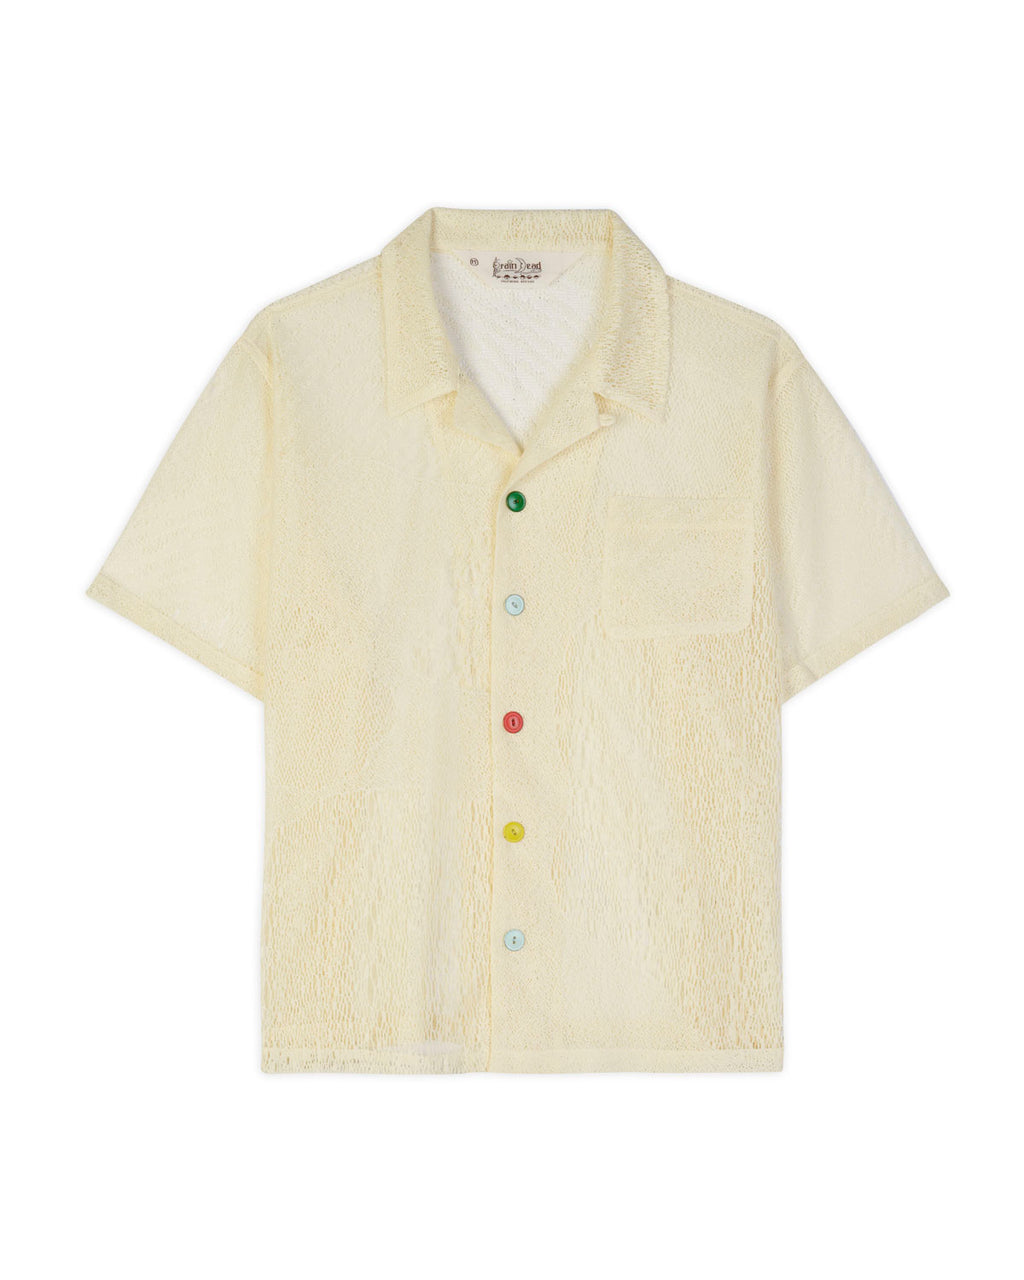 Engineered Mesh Short Sleeve Button Up - Natural